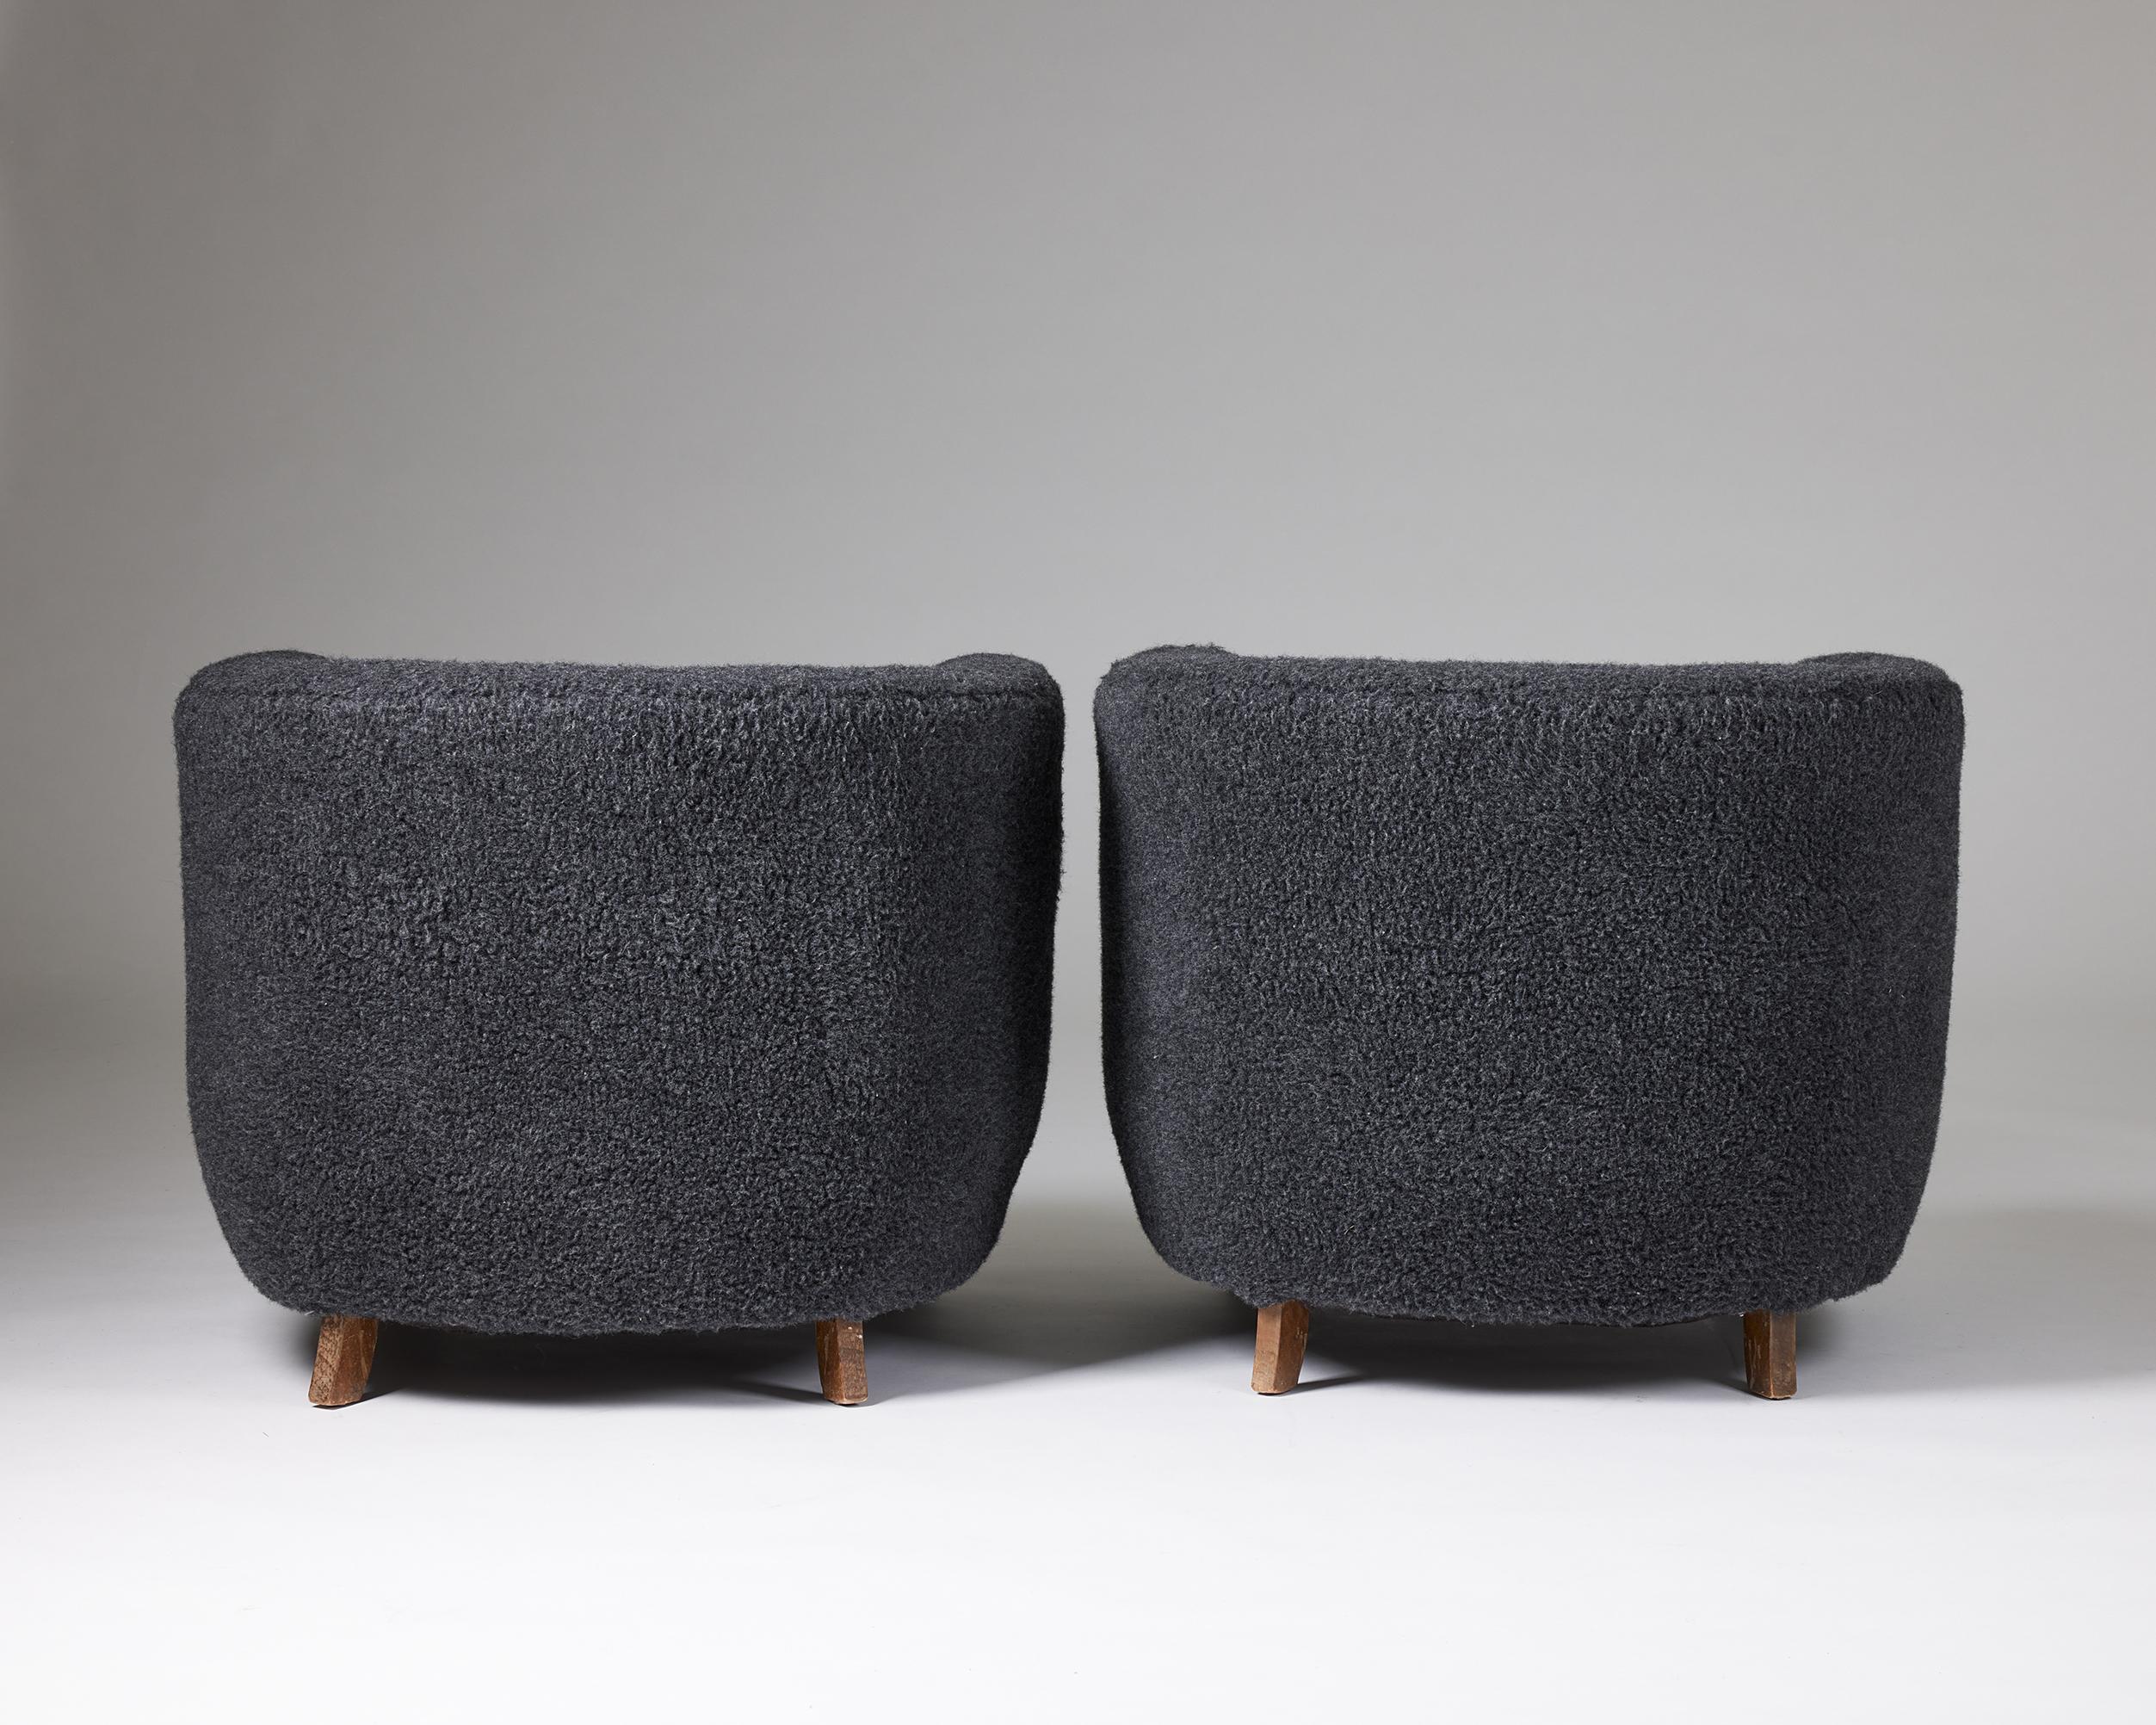 Wool Pair of Easy Chairs Designed by a Danish Cabinetmaker, Denmark, 1940s